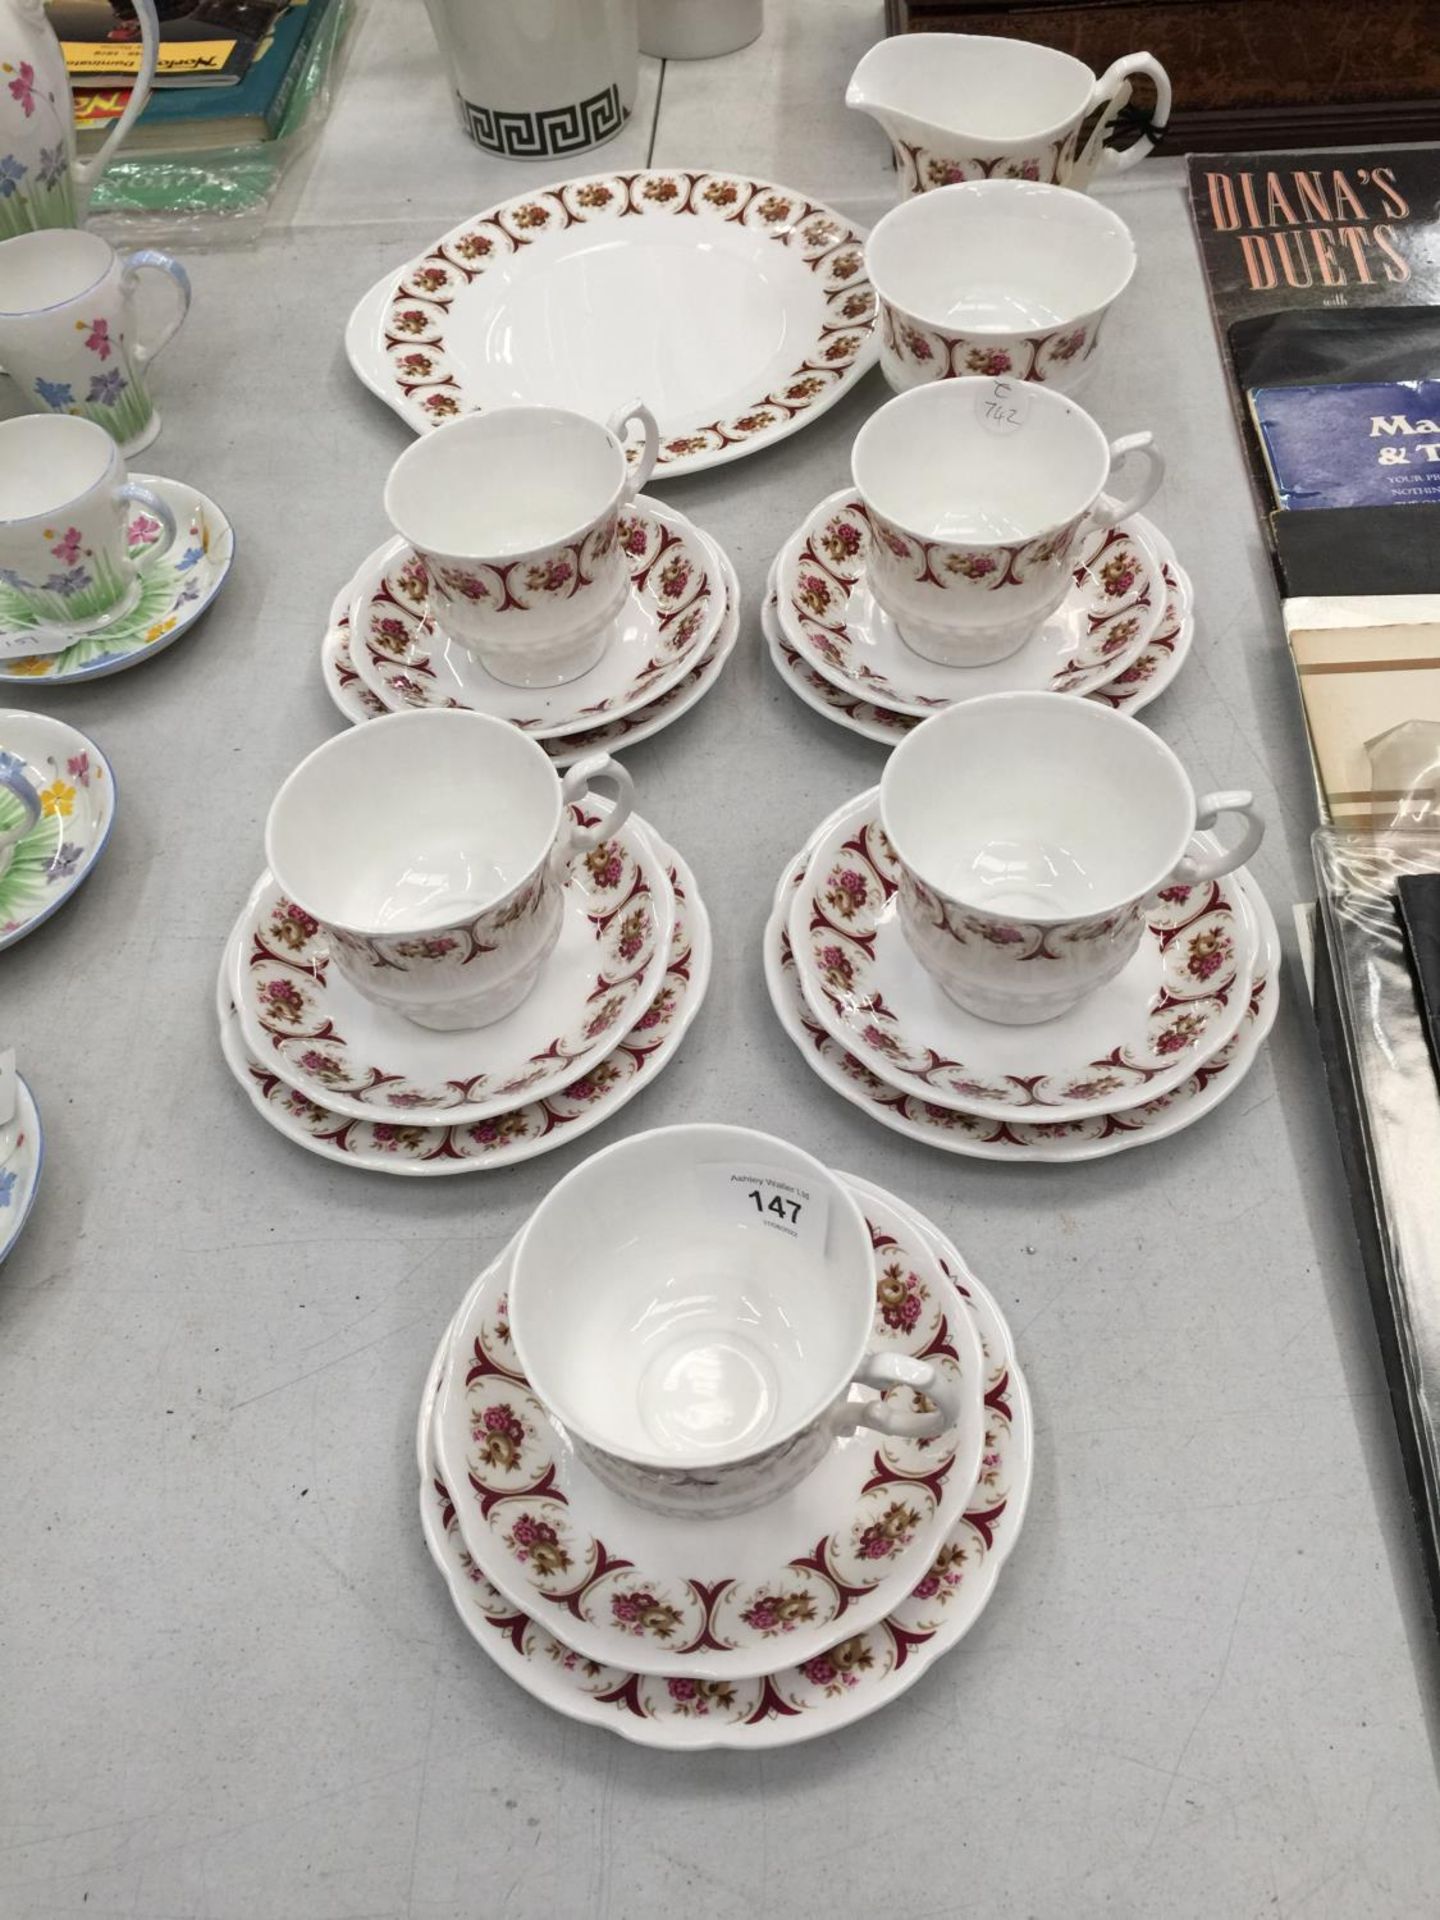 A CHINA PART TEASET 'DIANE' TO INCLUDE CUPS, SAUCERS, PLATES, CREAM JUG AND SUGAR BOWL